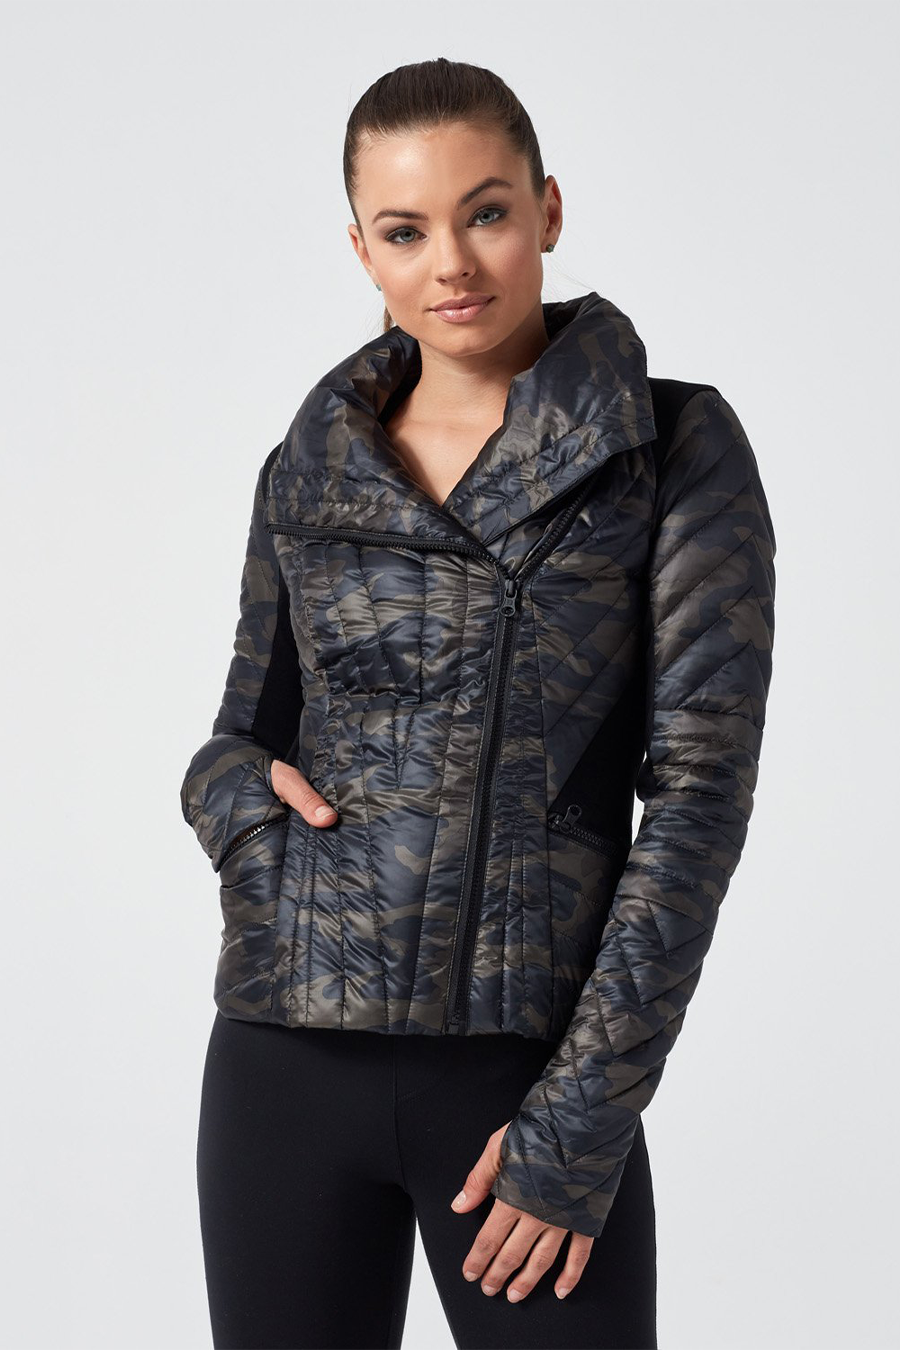 Motion Panel Puffer | Camo/Black - Main Image Number 1 of 3